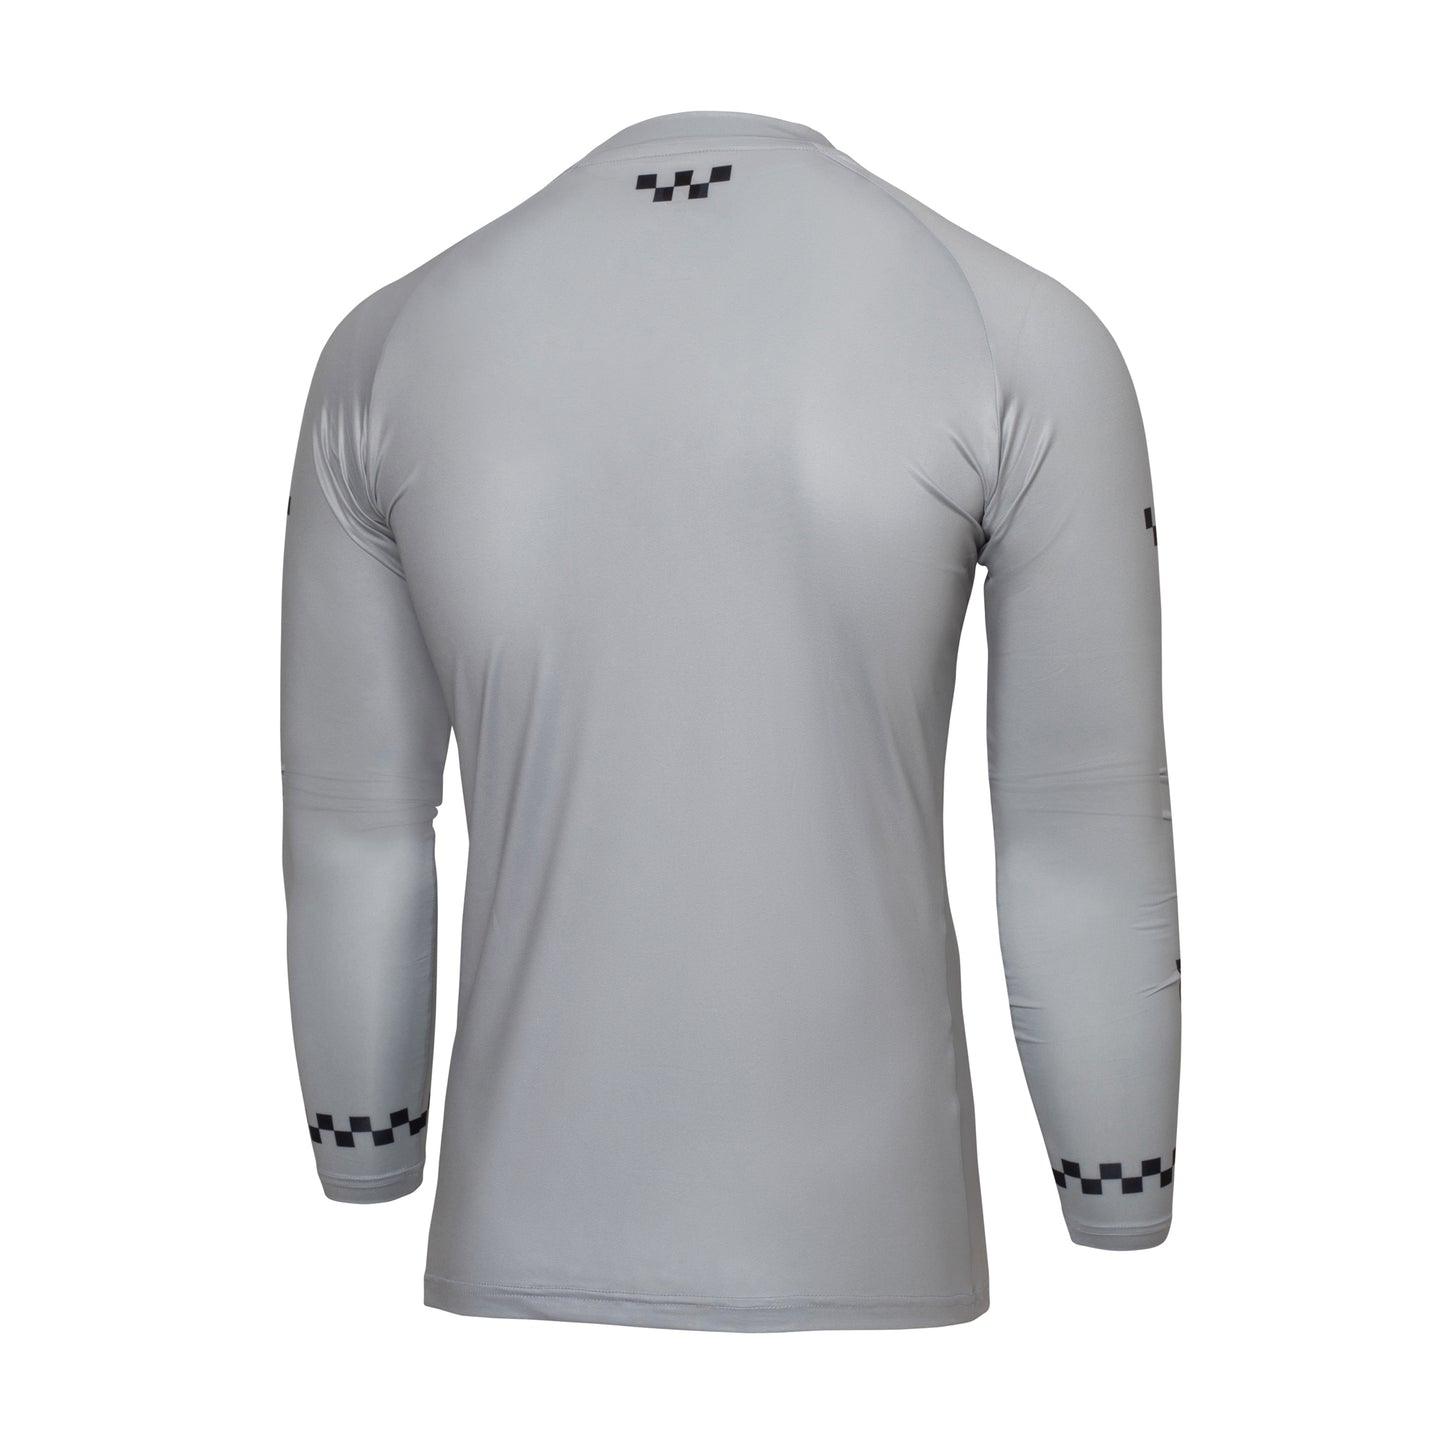 Youth Grayscale Compression Top